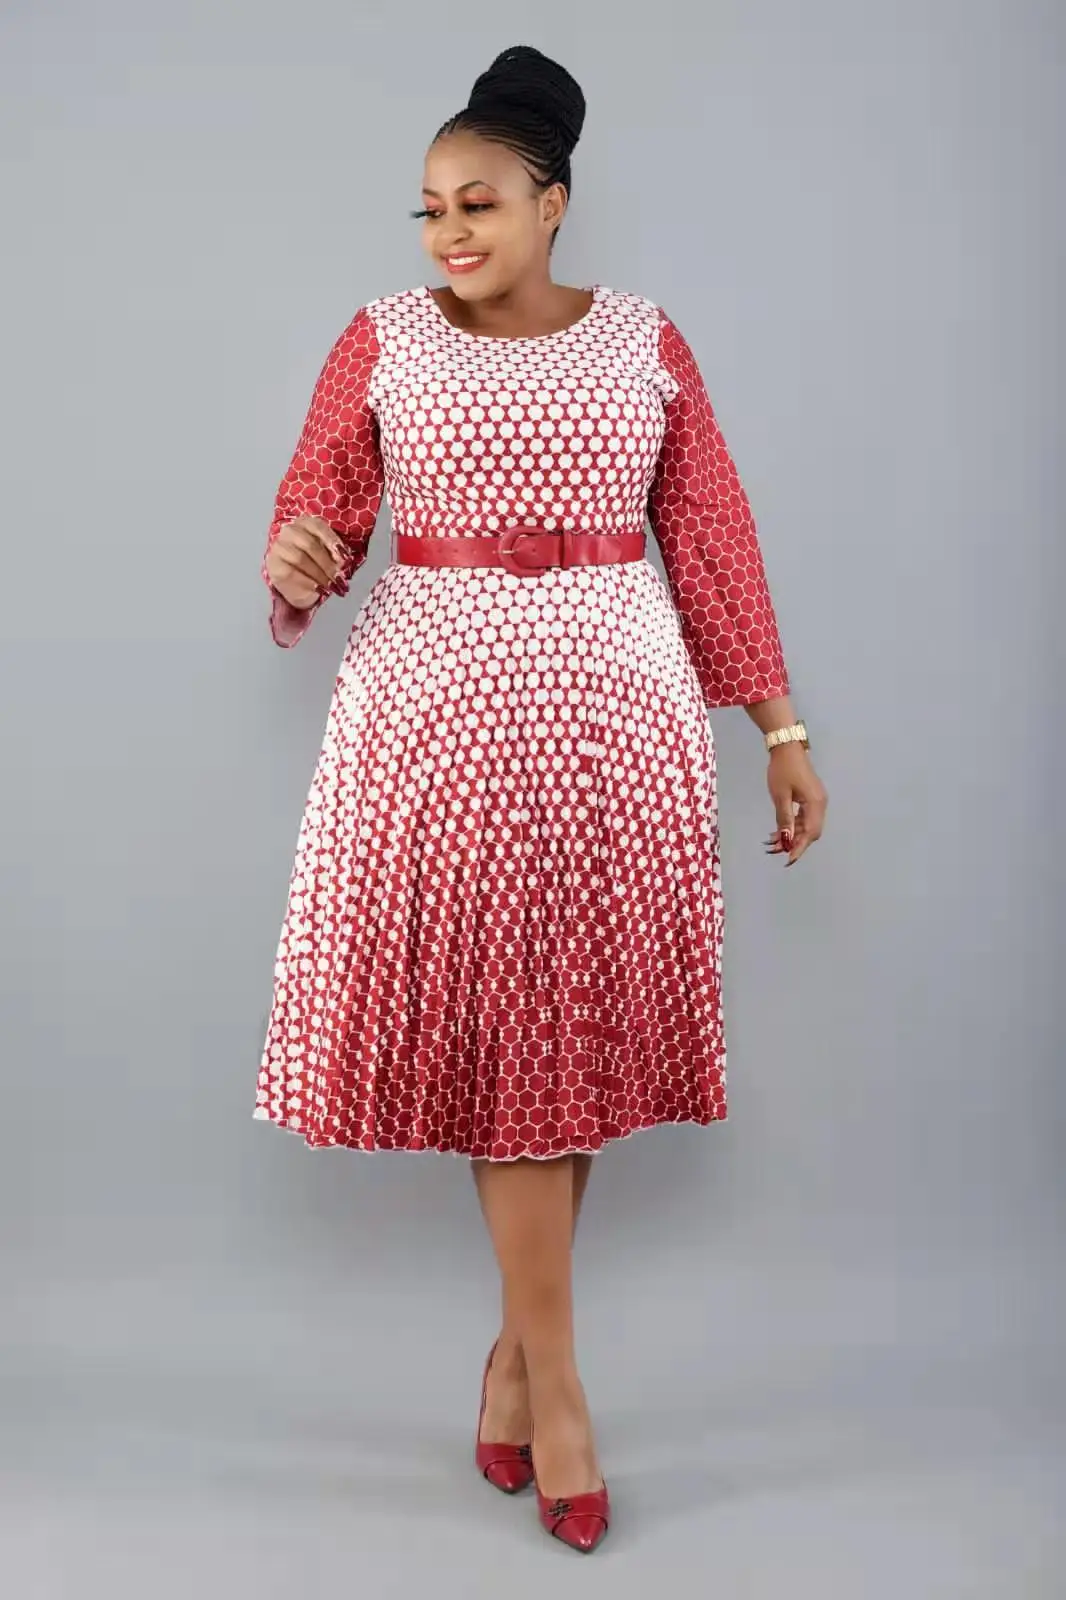 africa dress African women's spring and autumn plus size slim patchwork lace dress elegant dress long dress African clothing  2XL-6XL african wear